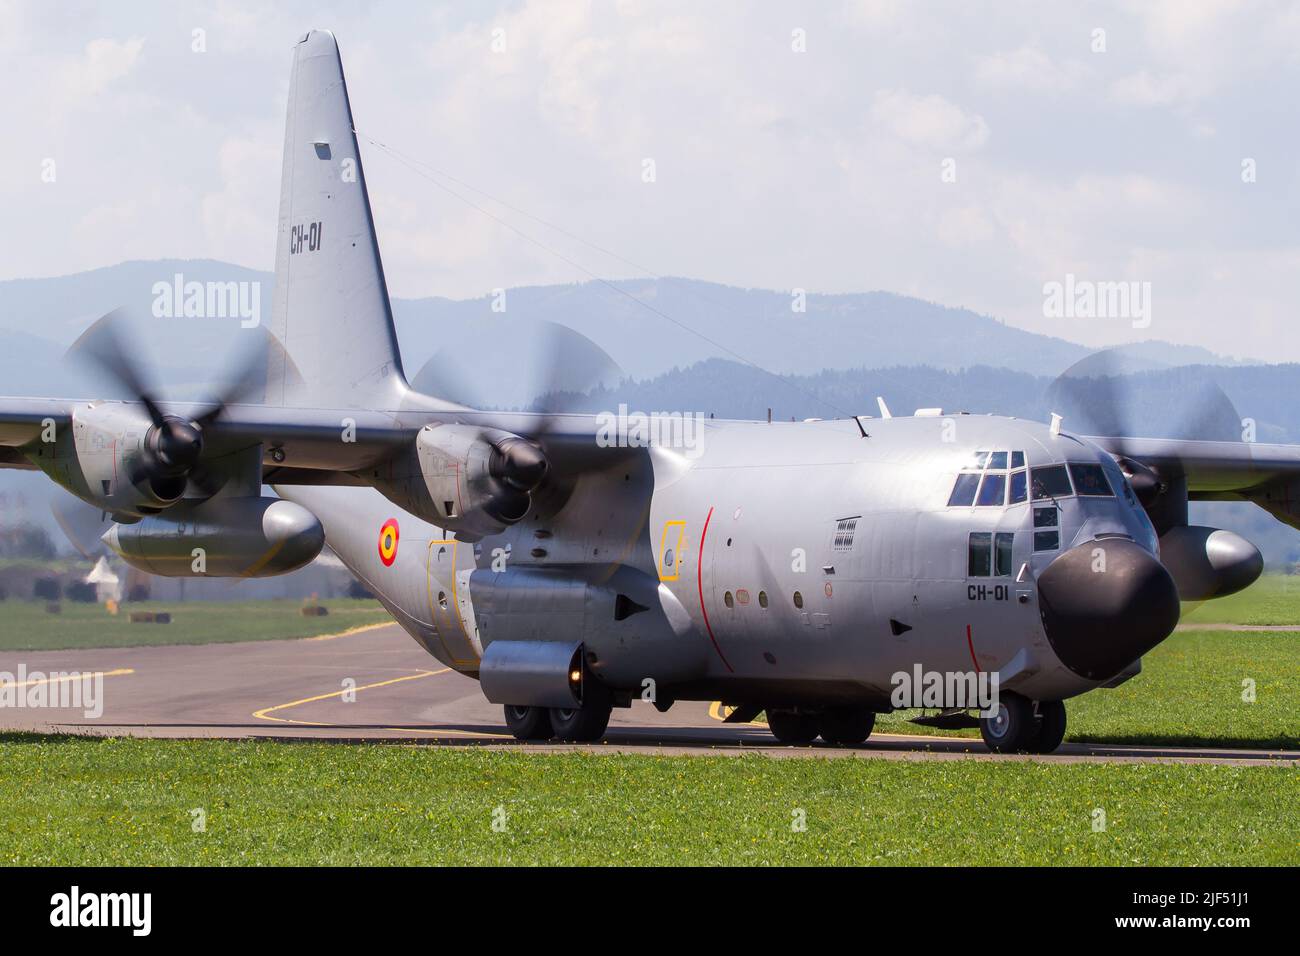 A Spanish Air Force Hercules military transport aircraft taxiing at airbase Zeltweg in Austria to the runway with turning propellers Stock Photo